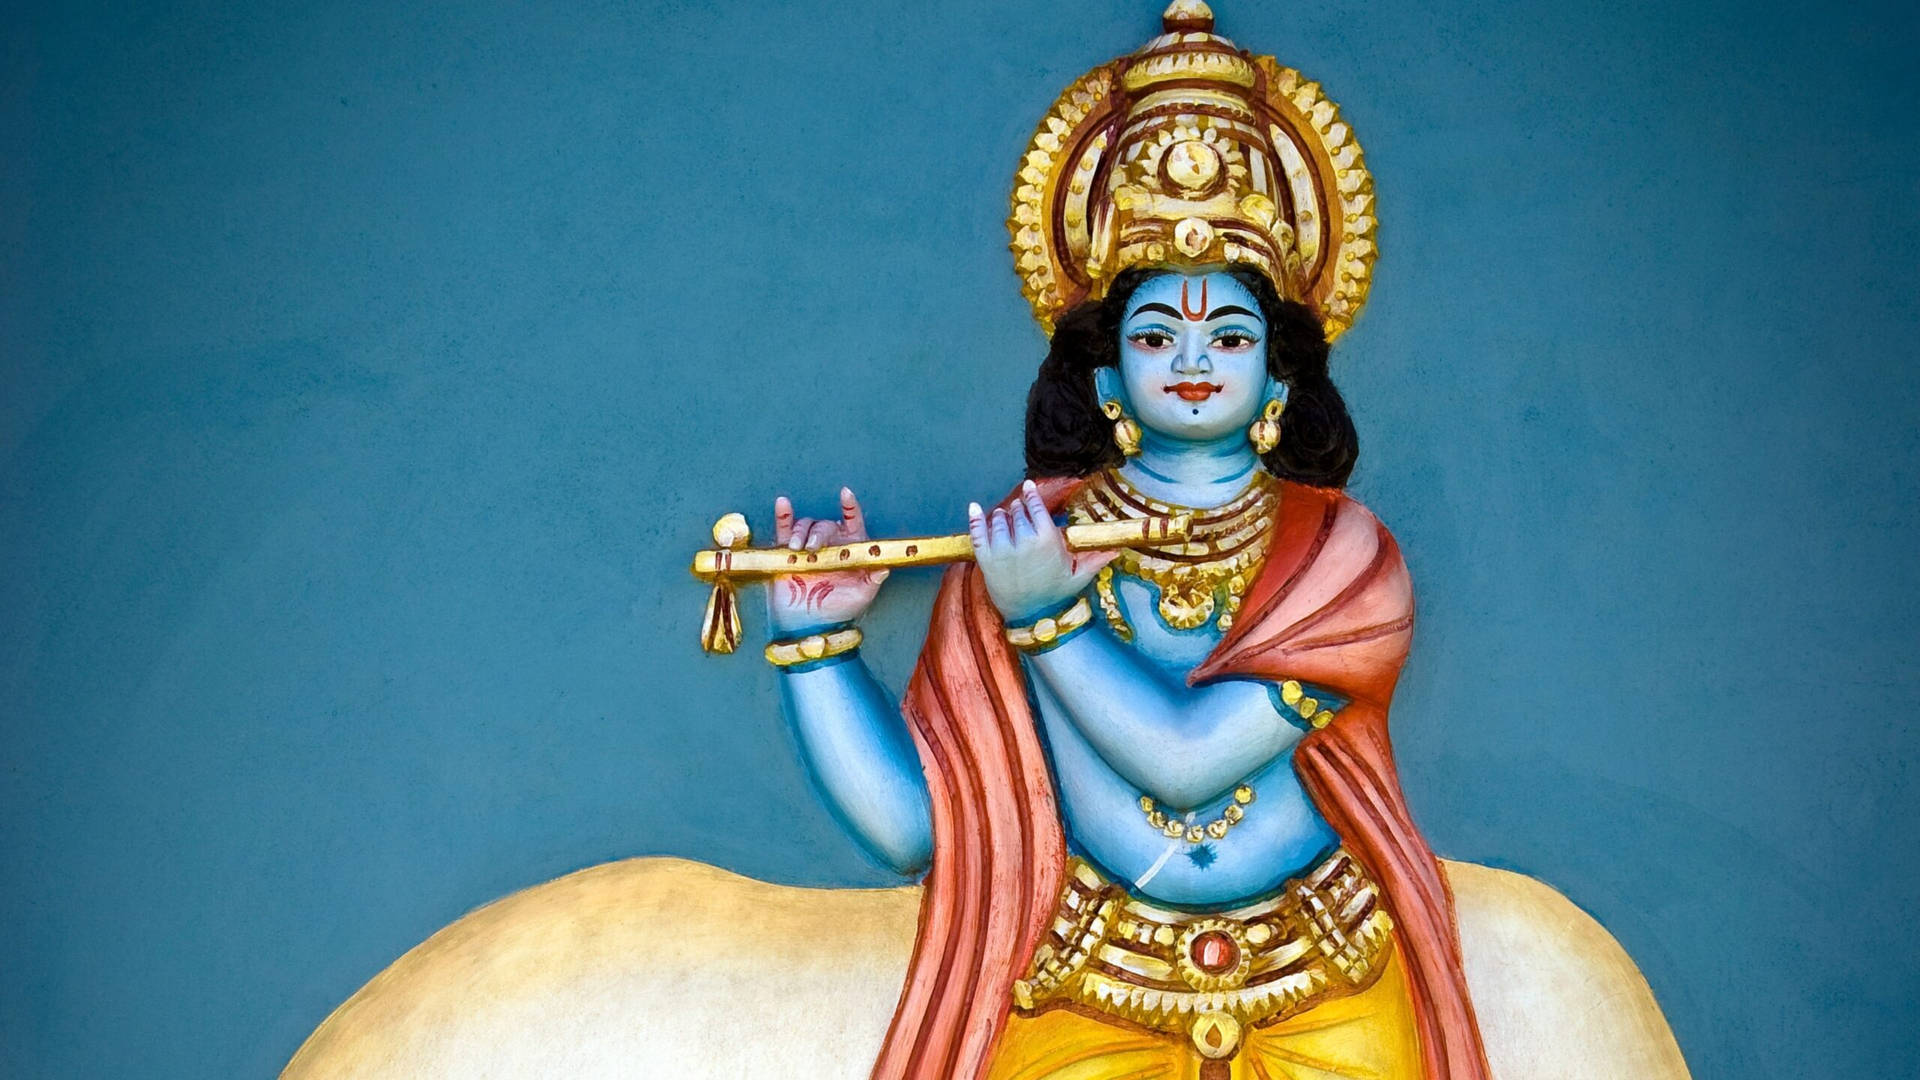 Painting Of Bal Krishna Playing The Flute Wallpaper